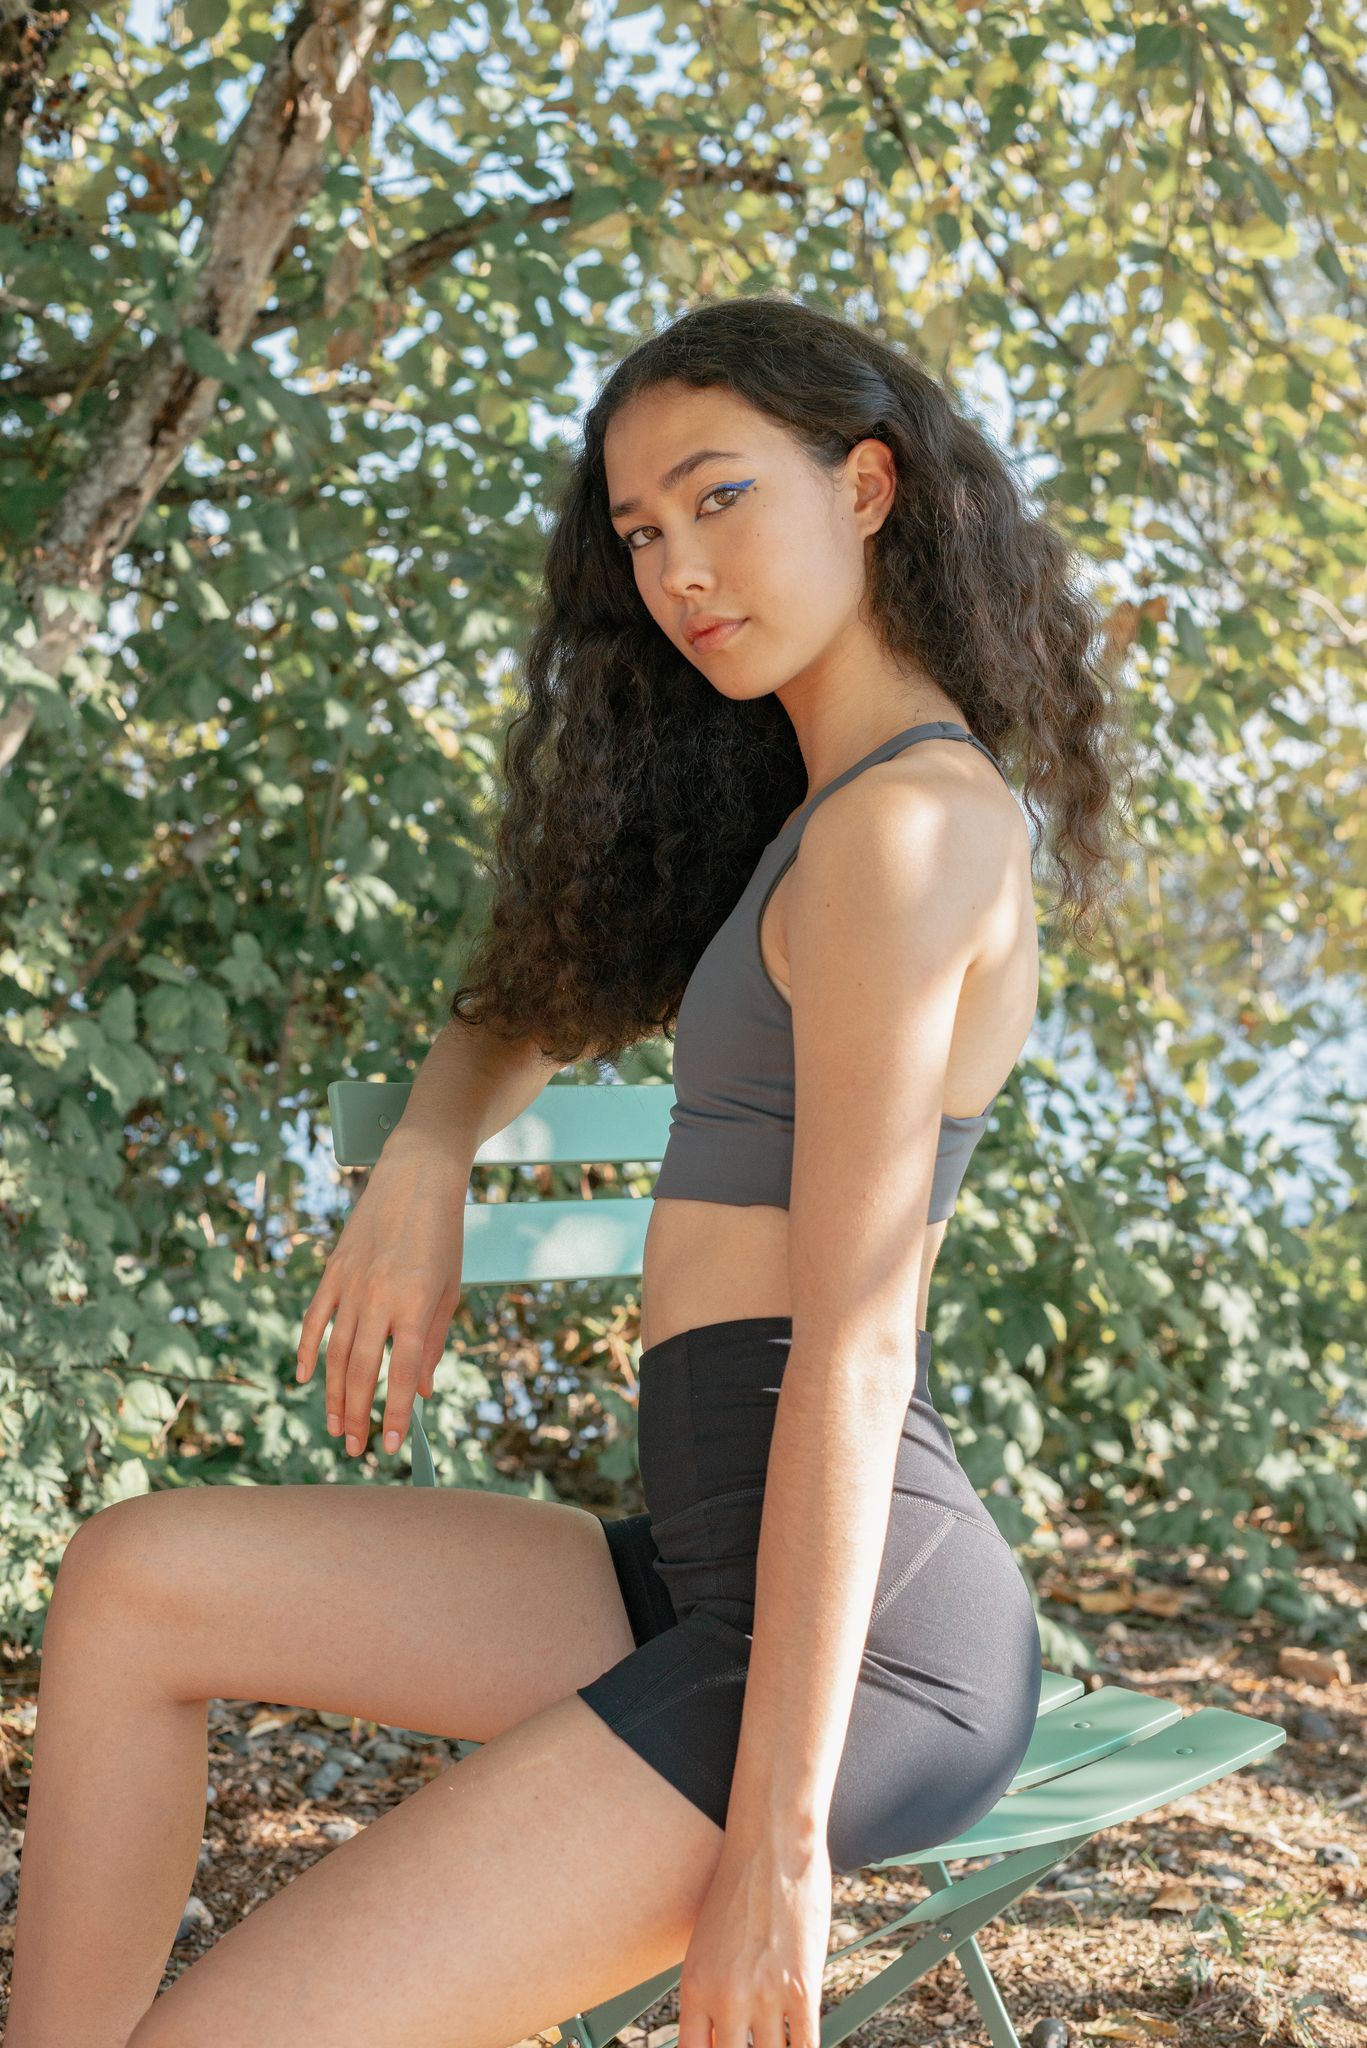 Girlfriend Collective Run Shorts High-Rise - Made from Recycled Plastic Bottles Black Pants